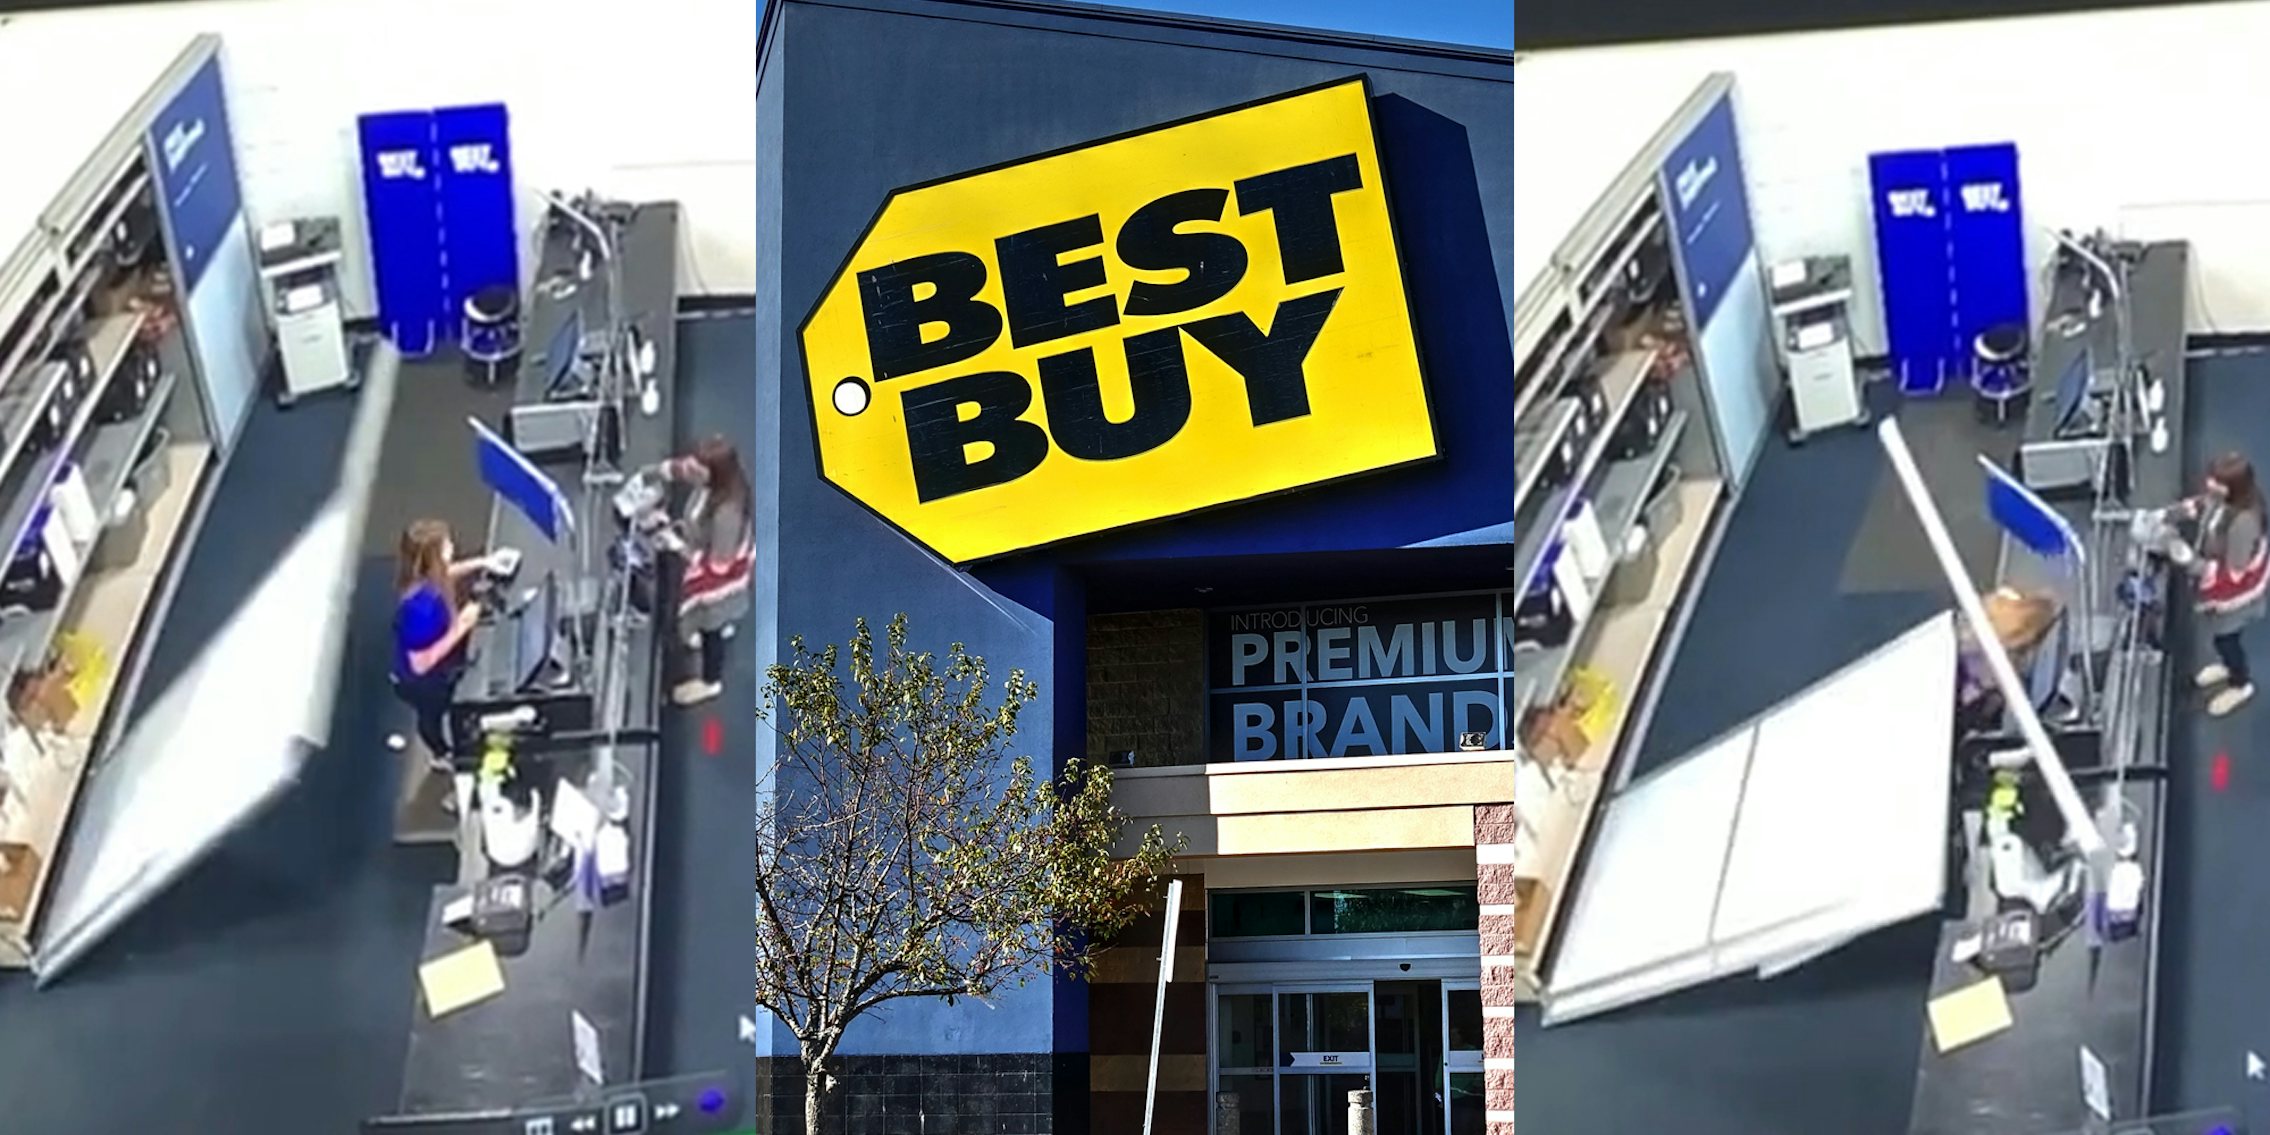 Young woman injured by falling door and metal bar in Best Buy